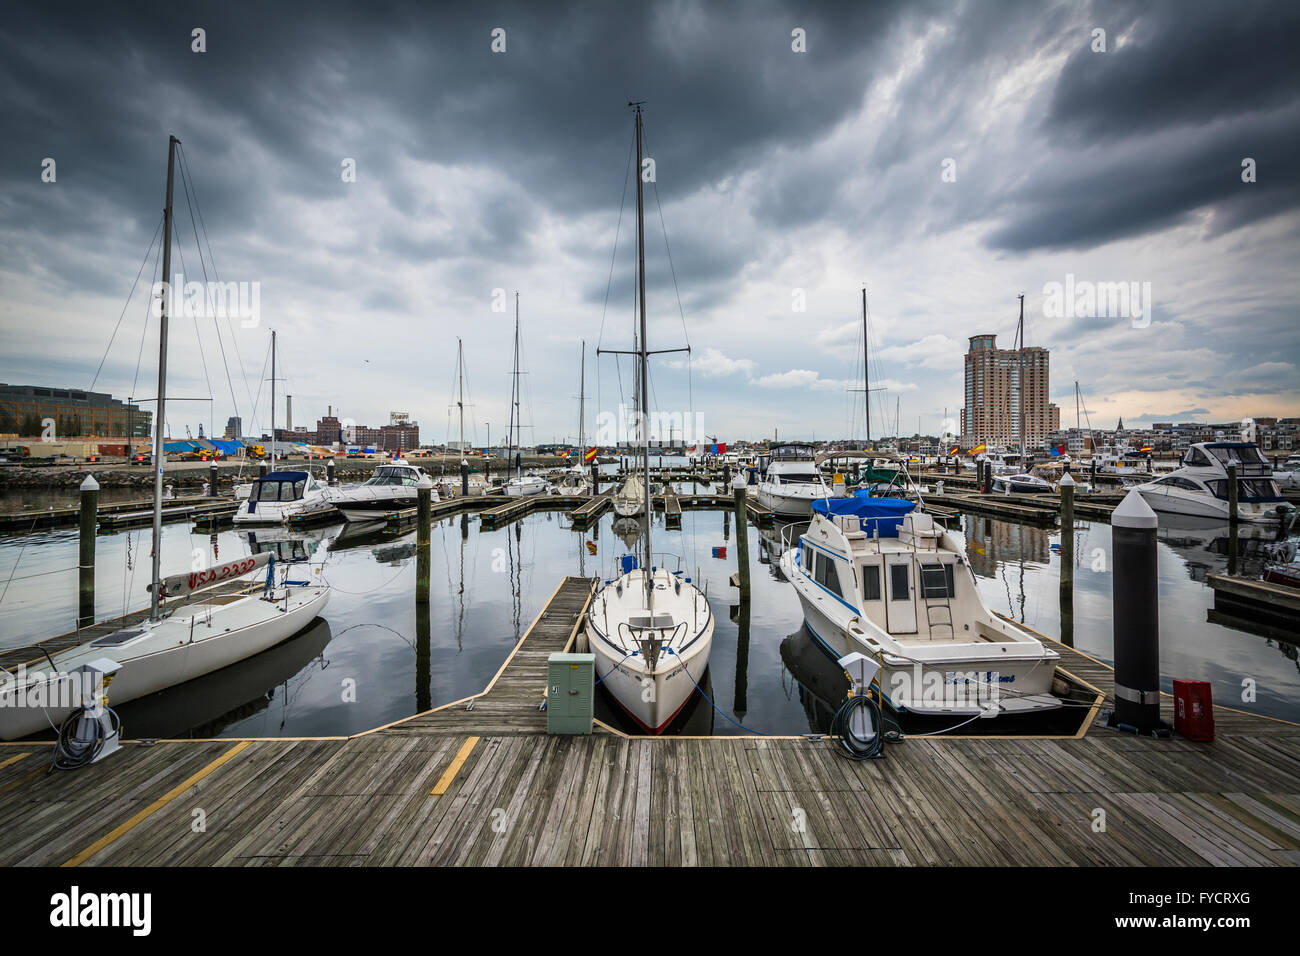 Storm clouds over docks and boats in Harbor East, Baltimore, Maryland. Stock Photo